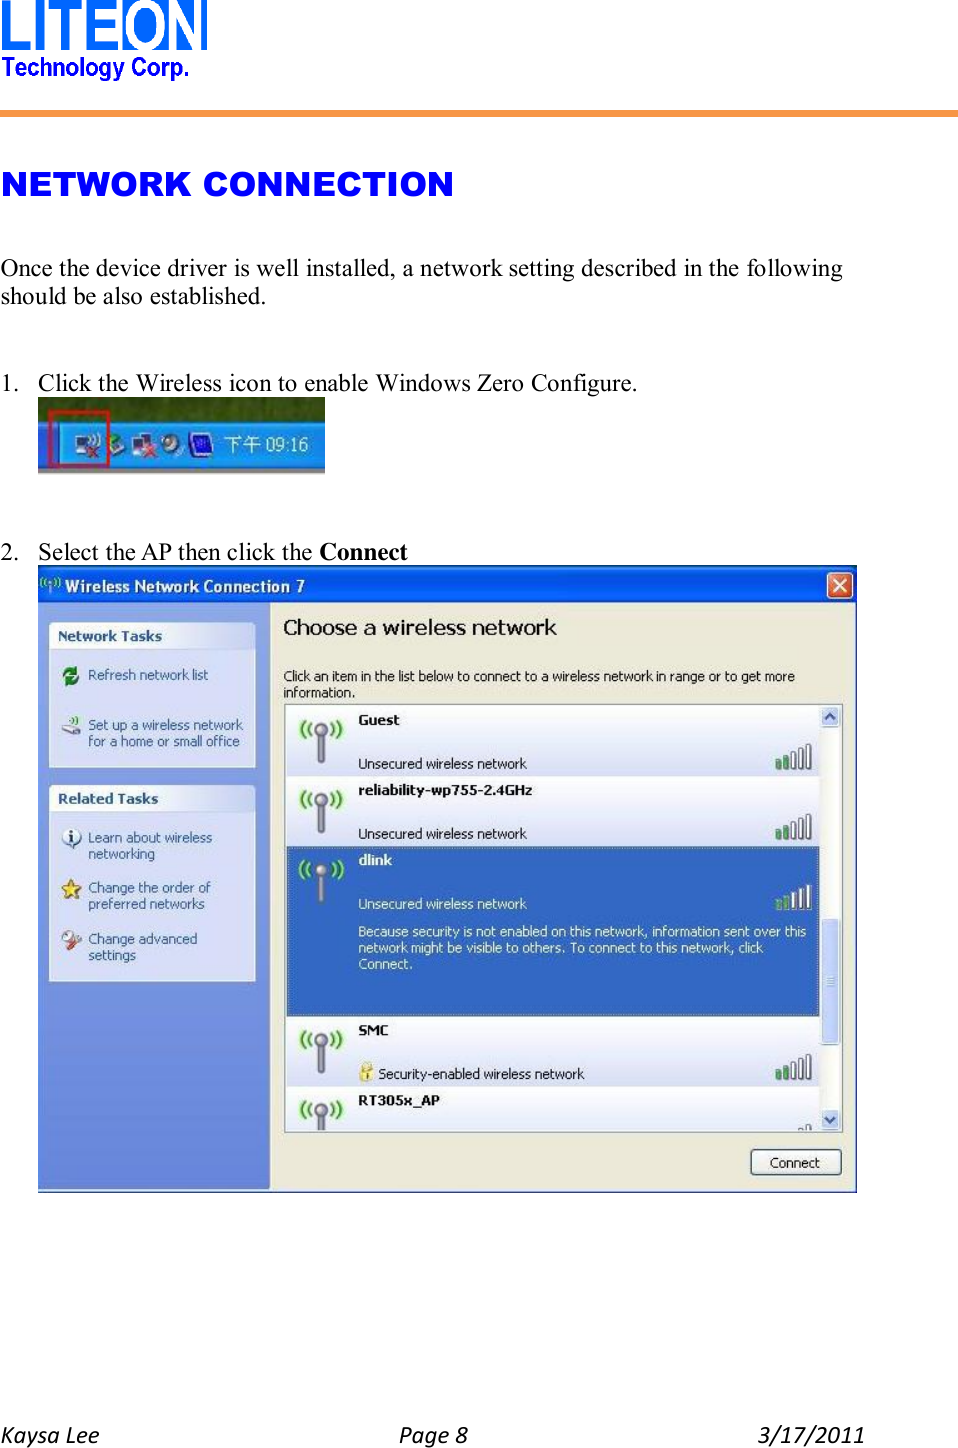   Kaysa Lee  Page 8  3/17/2011    NETWORK CONNECTION  Once the device driver is well installed, a network setting described in the following should be also established.   1. Click the Wireless icon to enable Windows Zero Configure.    2. Select the AP then click the Connect  